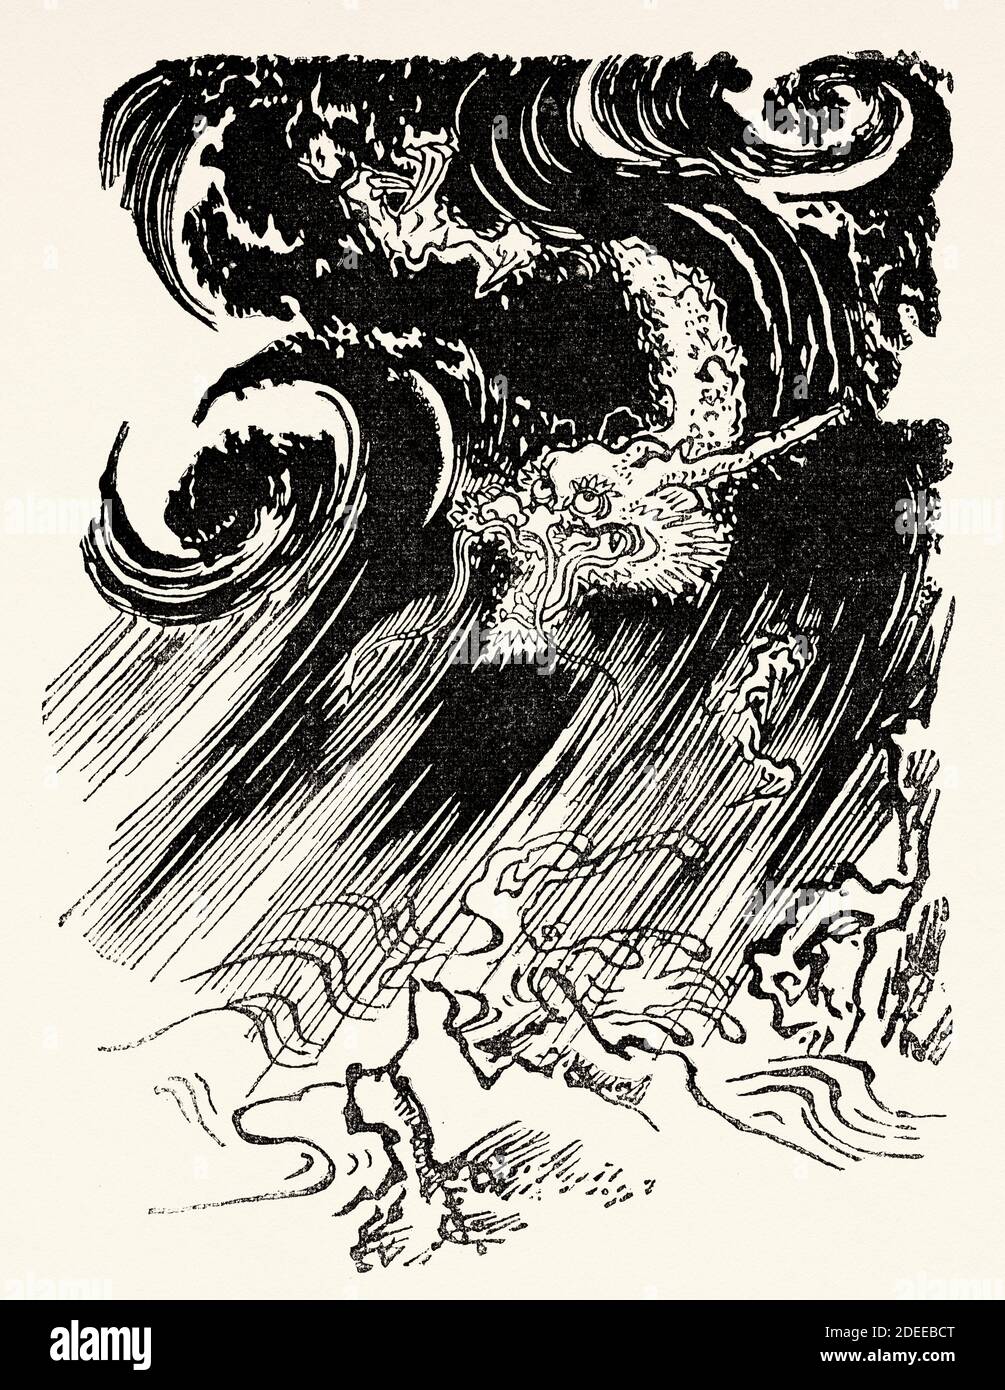 Ryujin or Ryojin. Dragon God, also known as Owatatsumi, is the tutelary deity of the sea in Japanese mythology. This Japanese dragon symbolized the power of the ocean, it had a large mouth and was able to transform into a human form, Japan. Old 19th century engraved illustration Travel to Japan by Aime Humbert  from El Mundo en La Mano 1879 Stock Photo